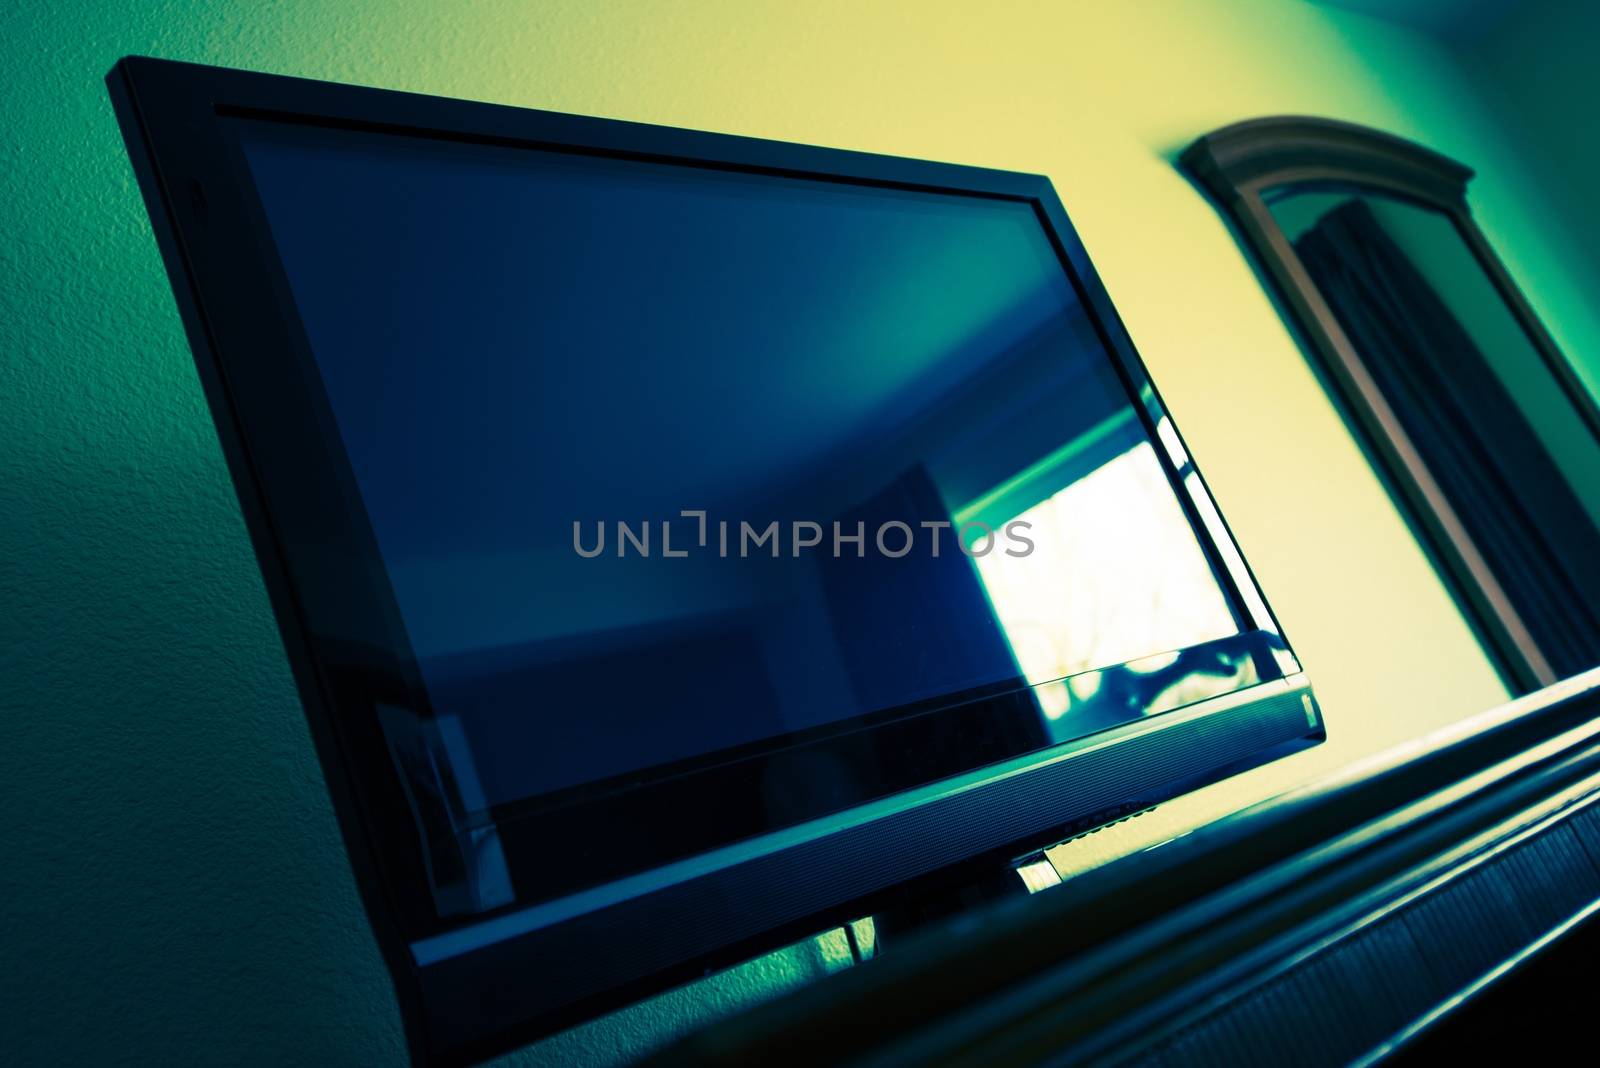 Flat Screen TV in a Room. Television Device. Dark Greenish Blue Color Grading.